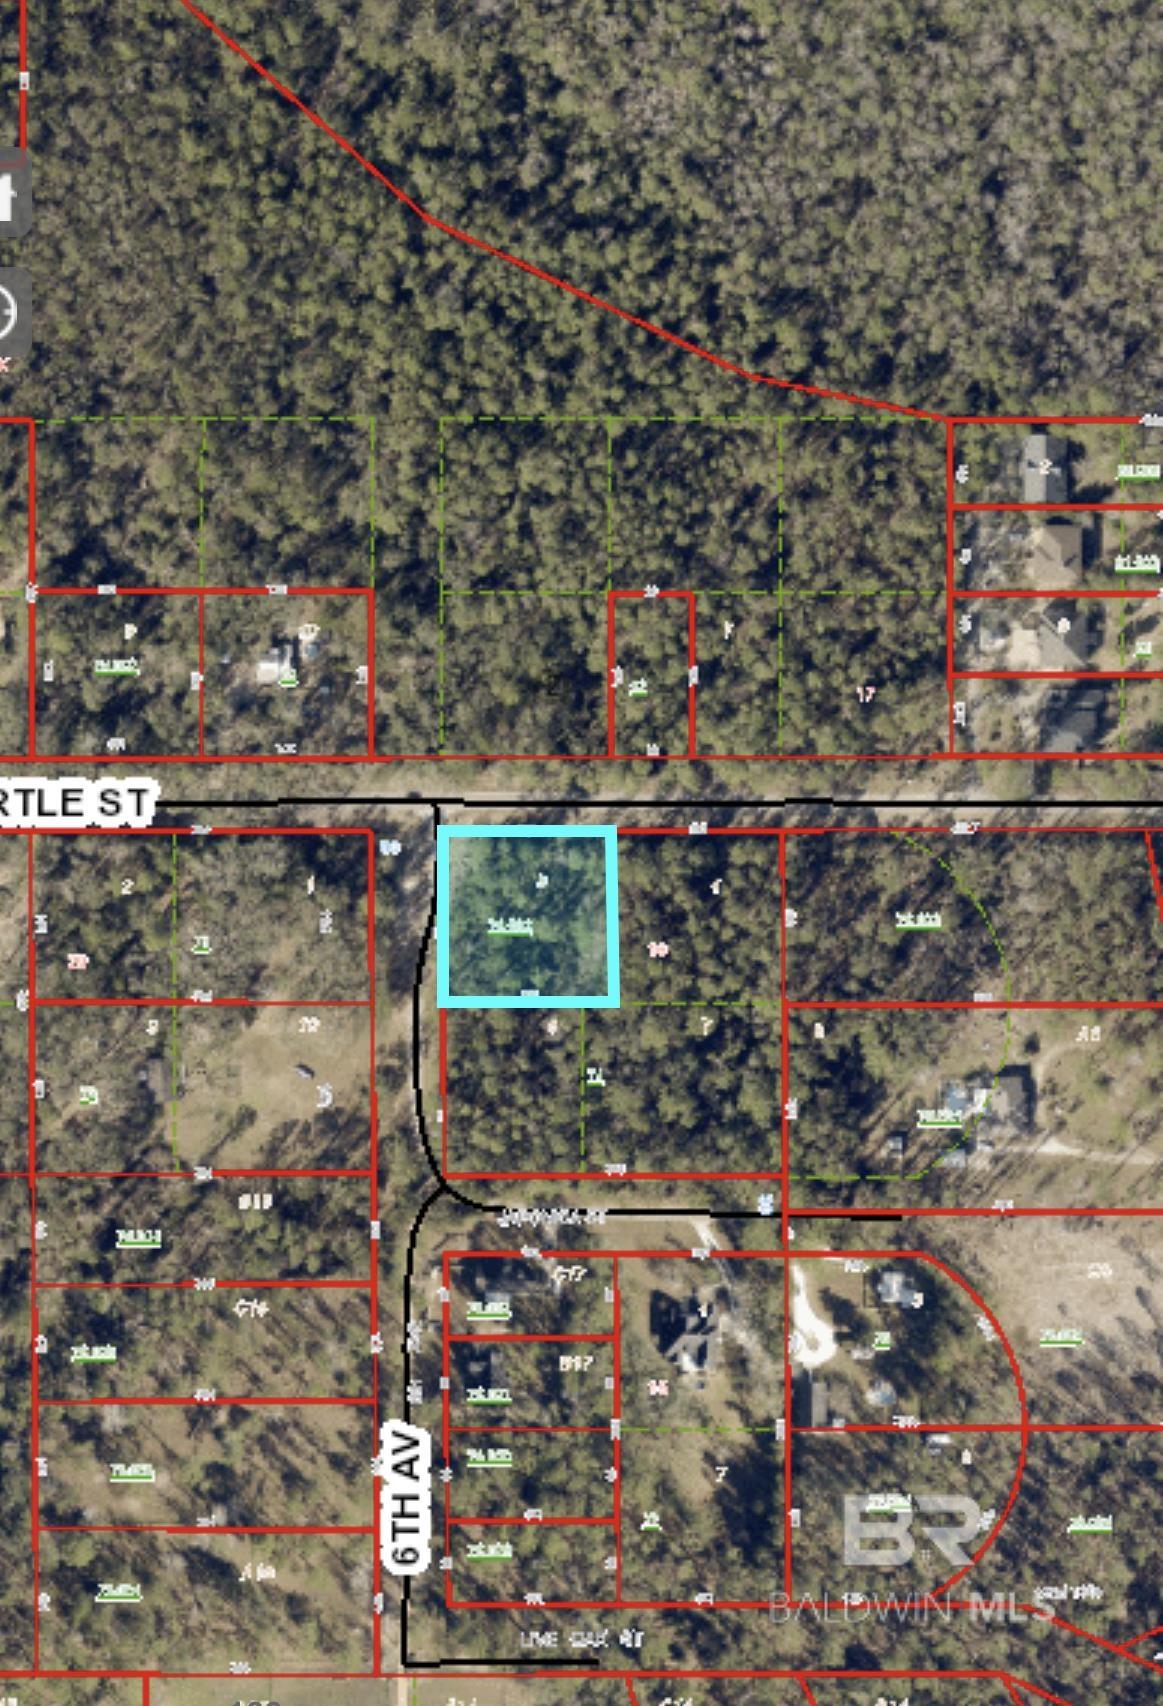 Great opportunity to buy a large unzoned corner lot in Fairhope! Property is minutes away from Fish River so use it however you see fit! Buyer and buyer's agent to verify all information.